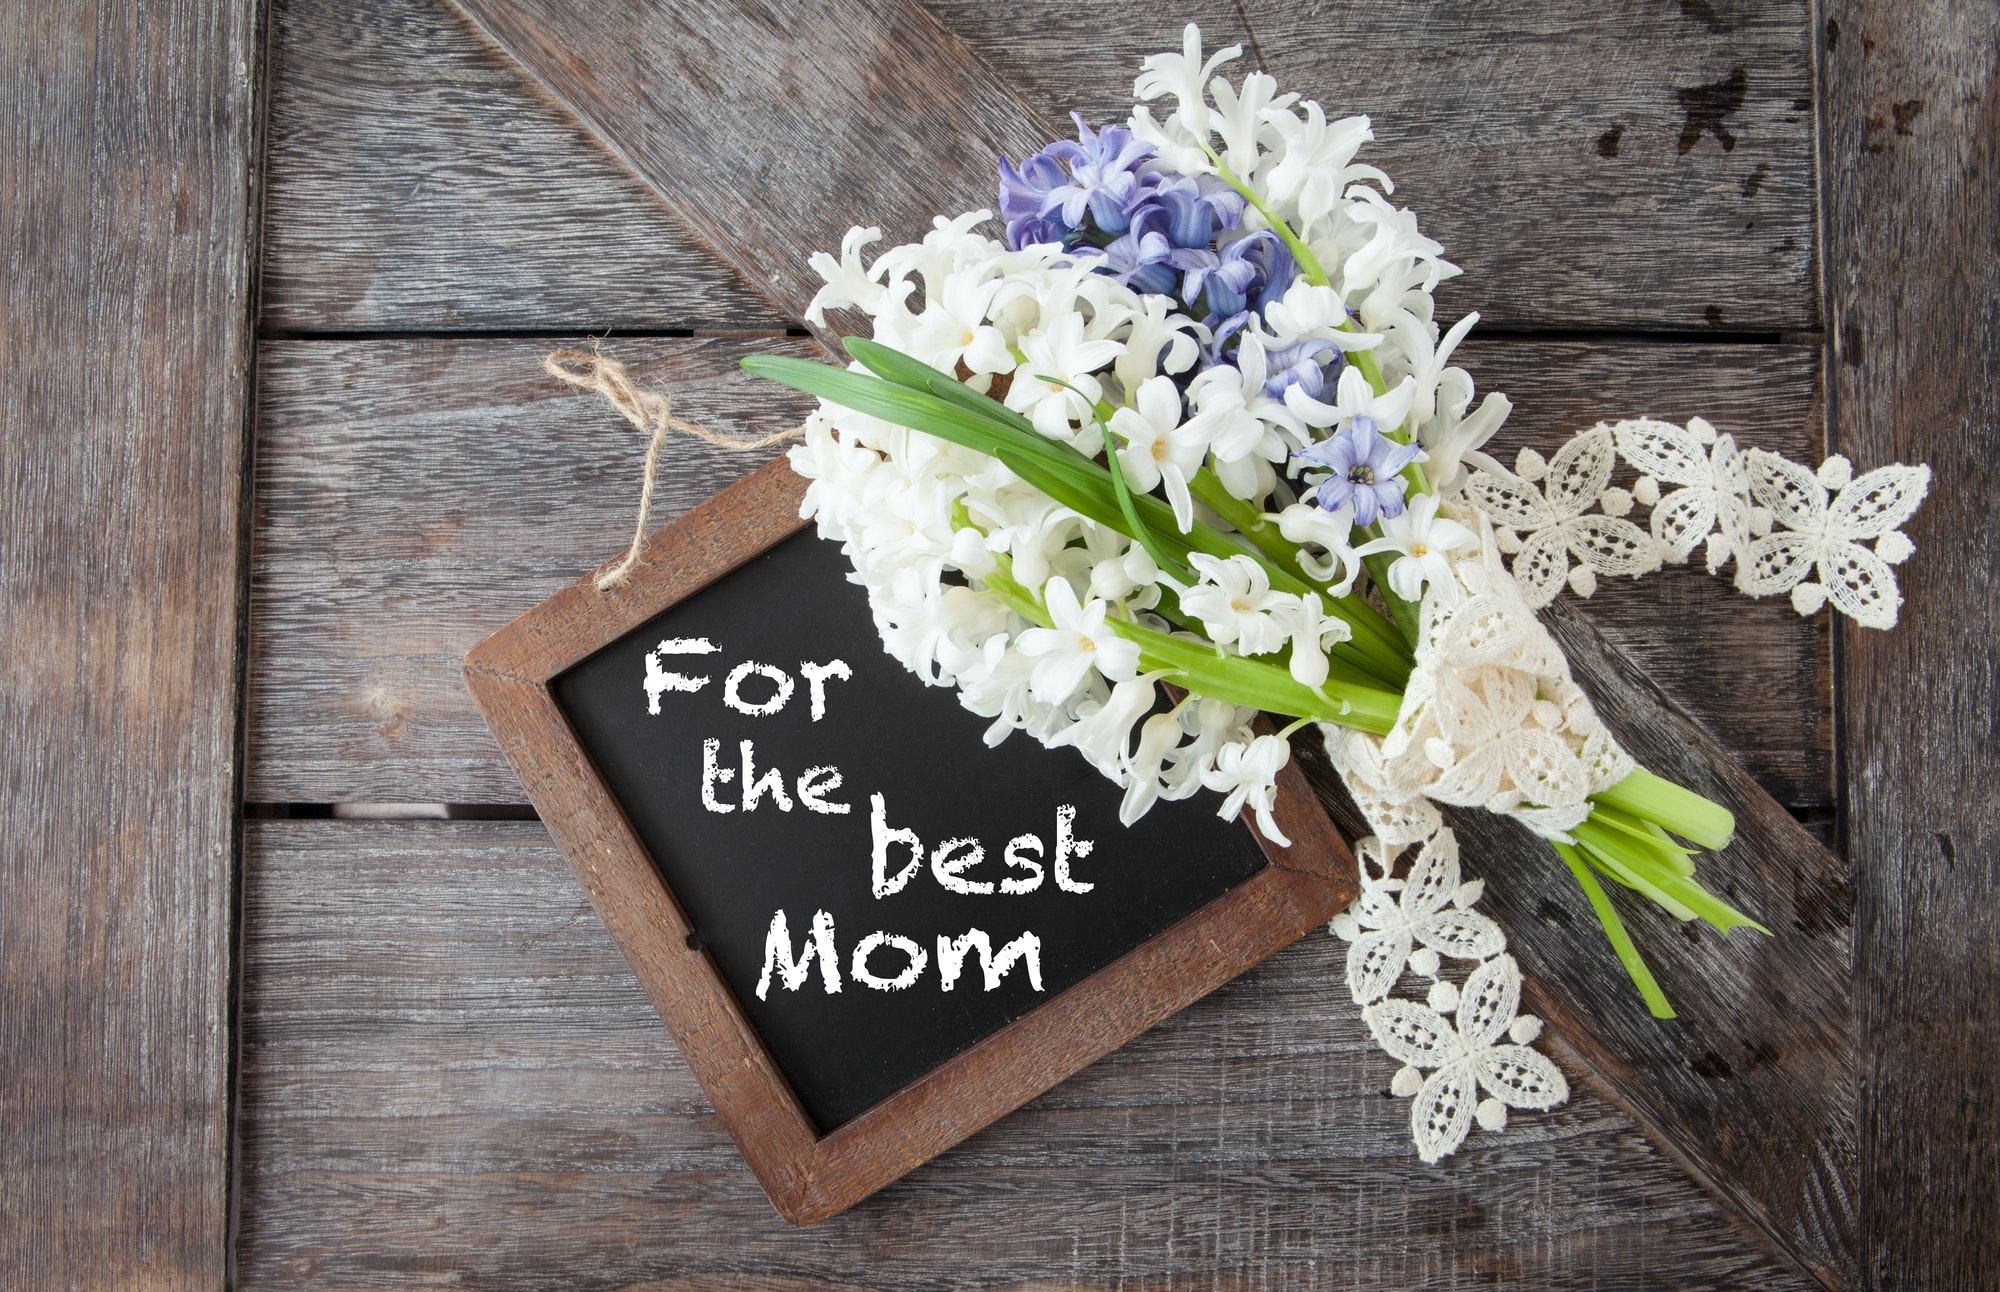 For the best mom: Octane’s staff picks for Mothers’ Day